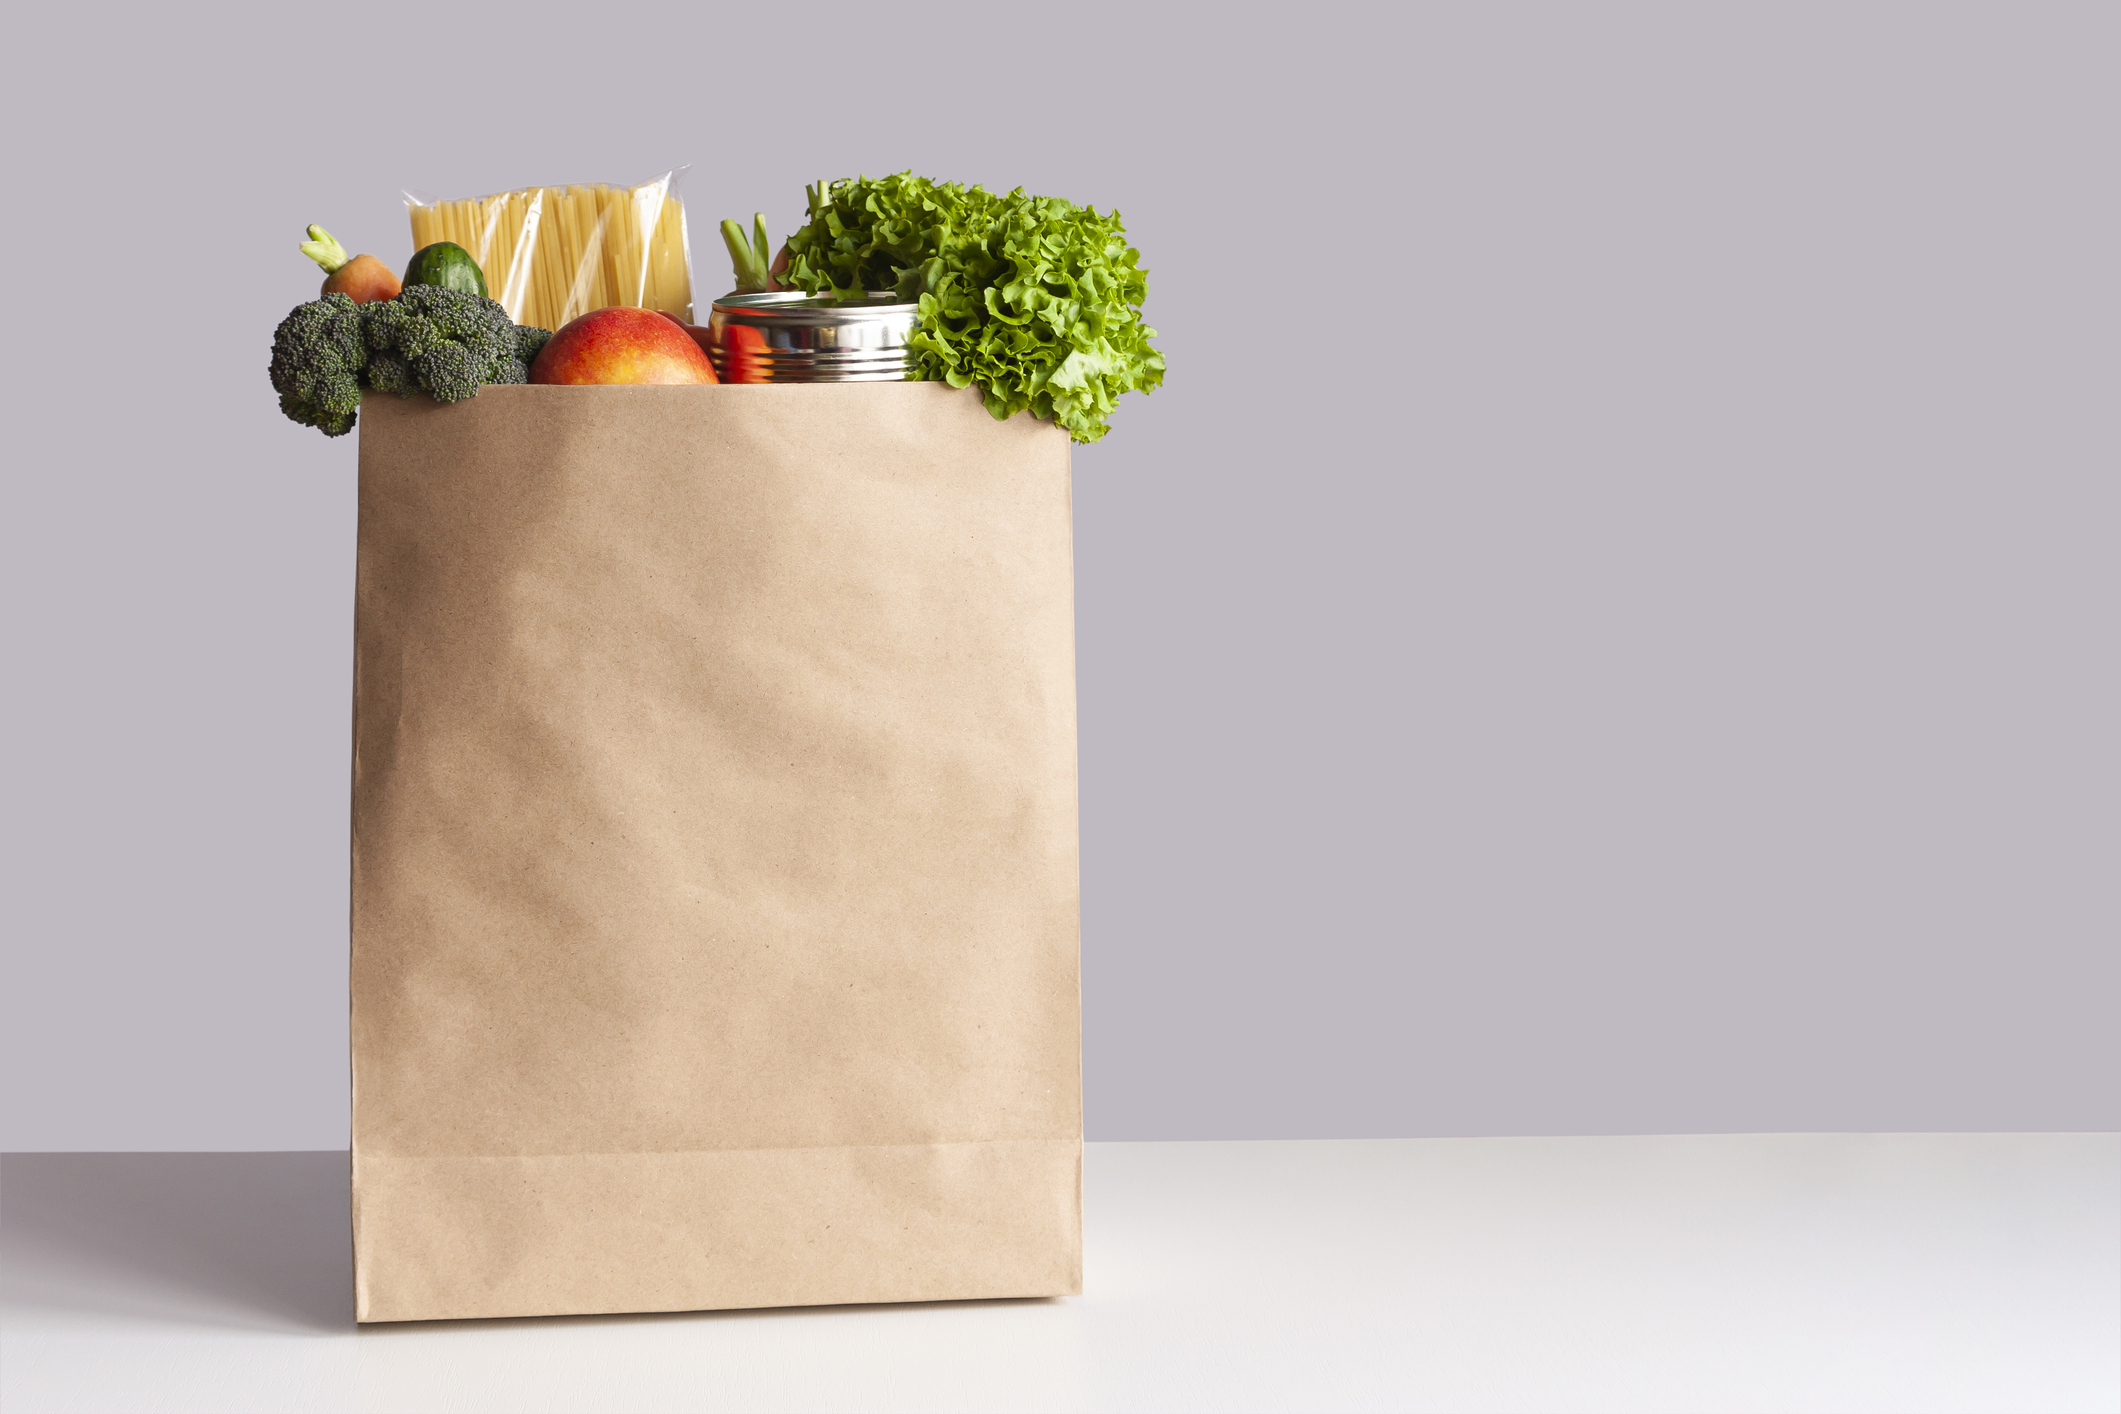 Various grocery items in paper bag on white table opposite gray wall. Bag of food with fresh vegetables, fruits, pasta and canned goods.